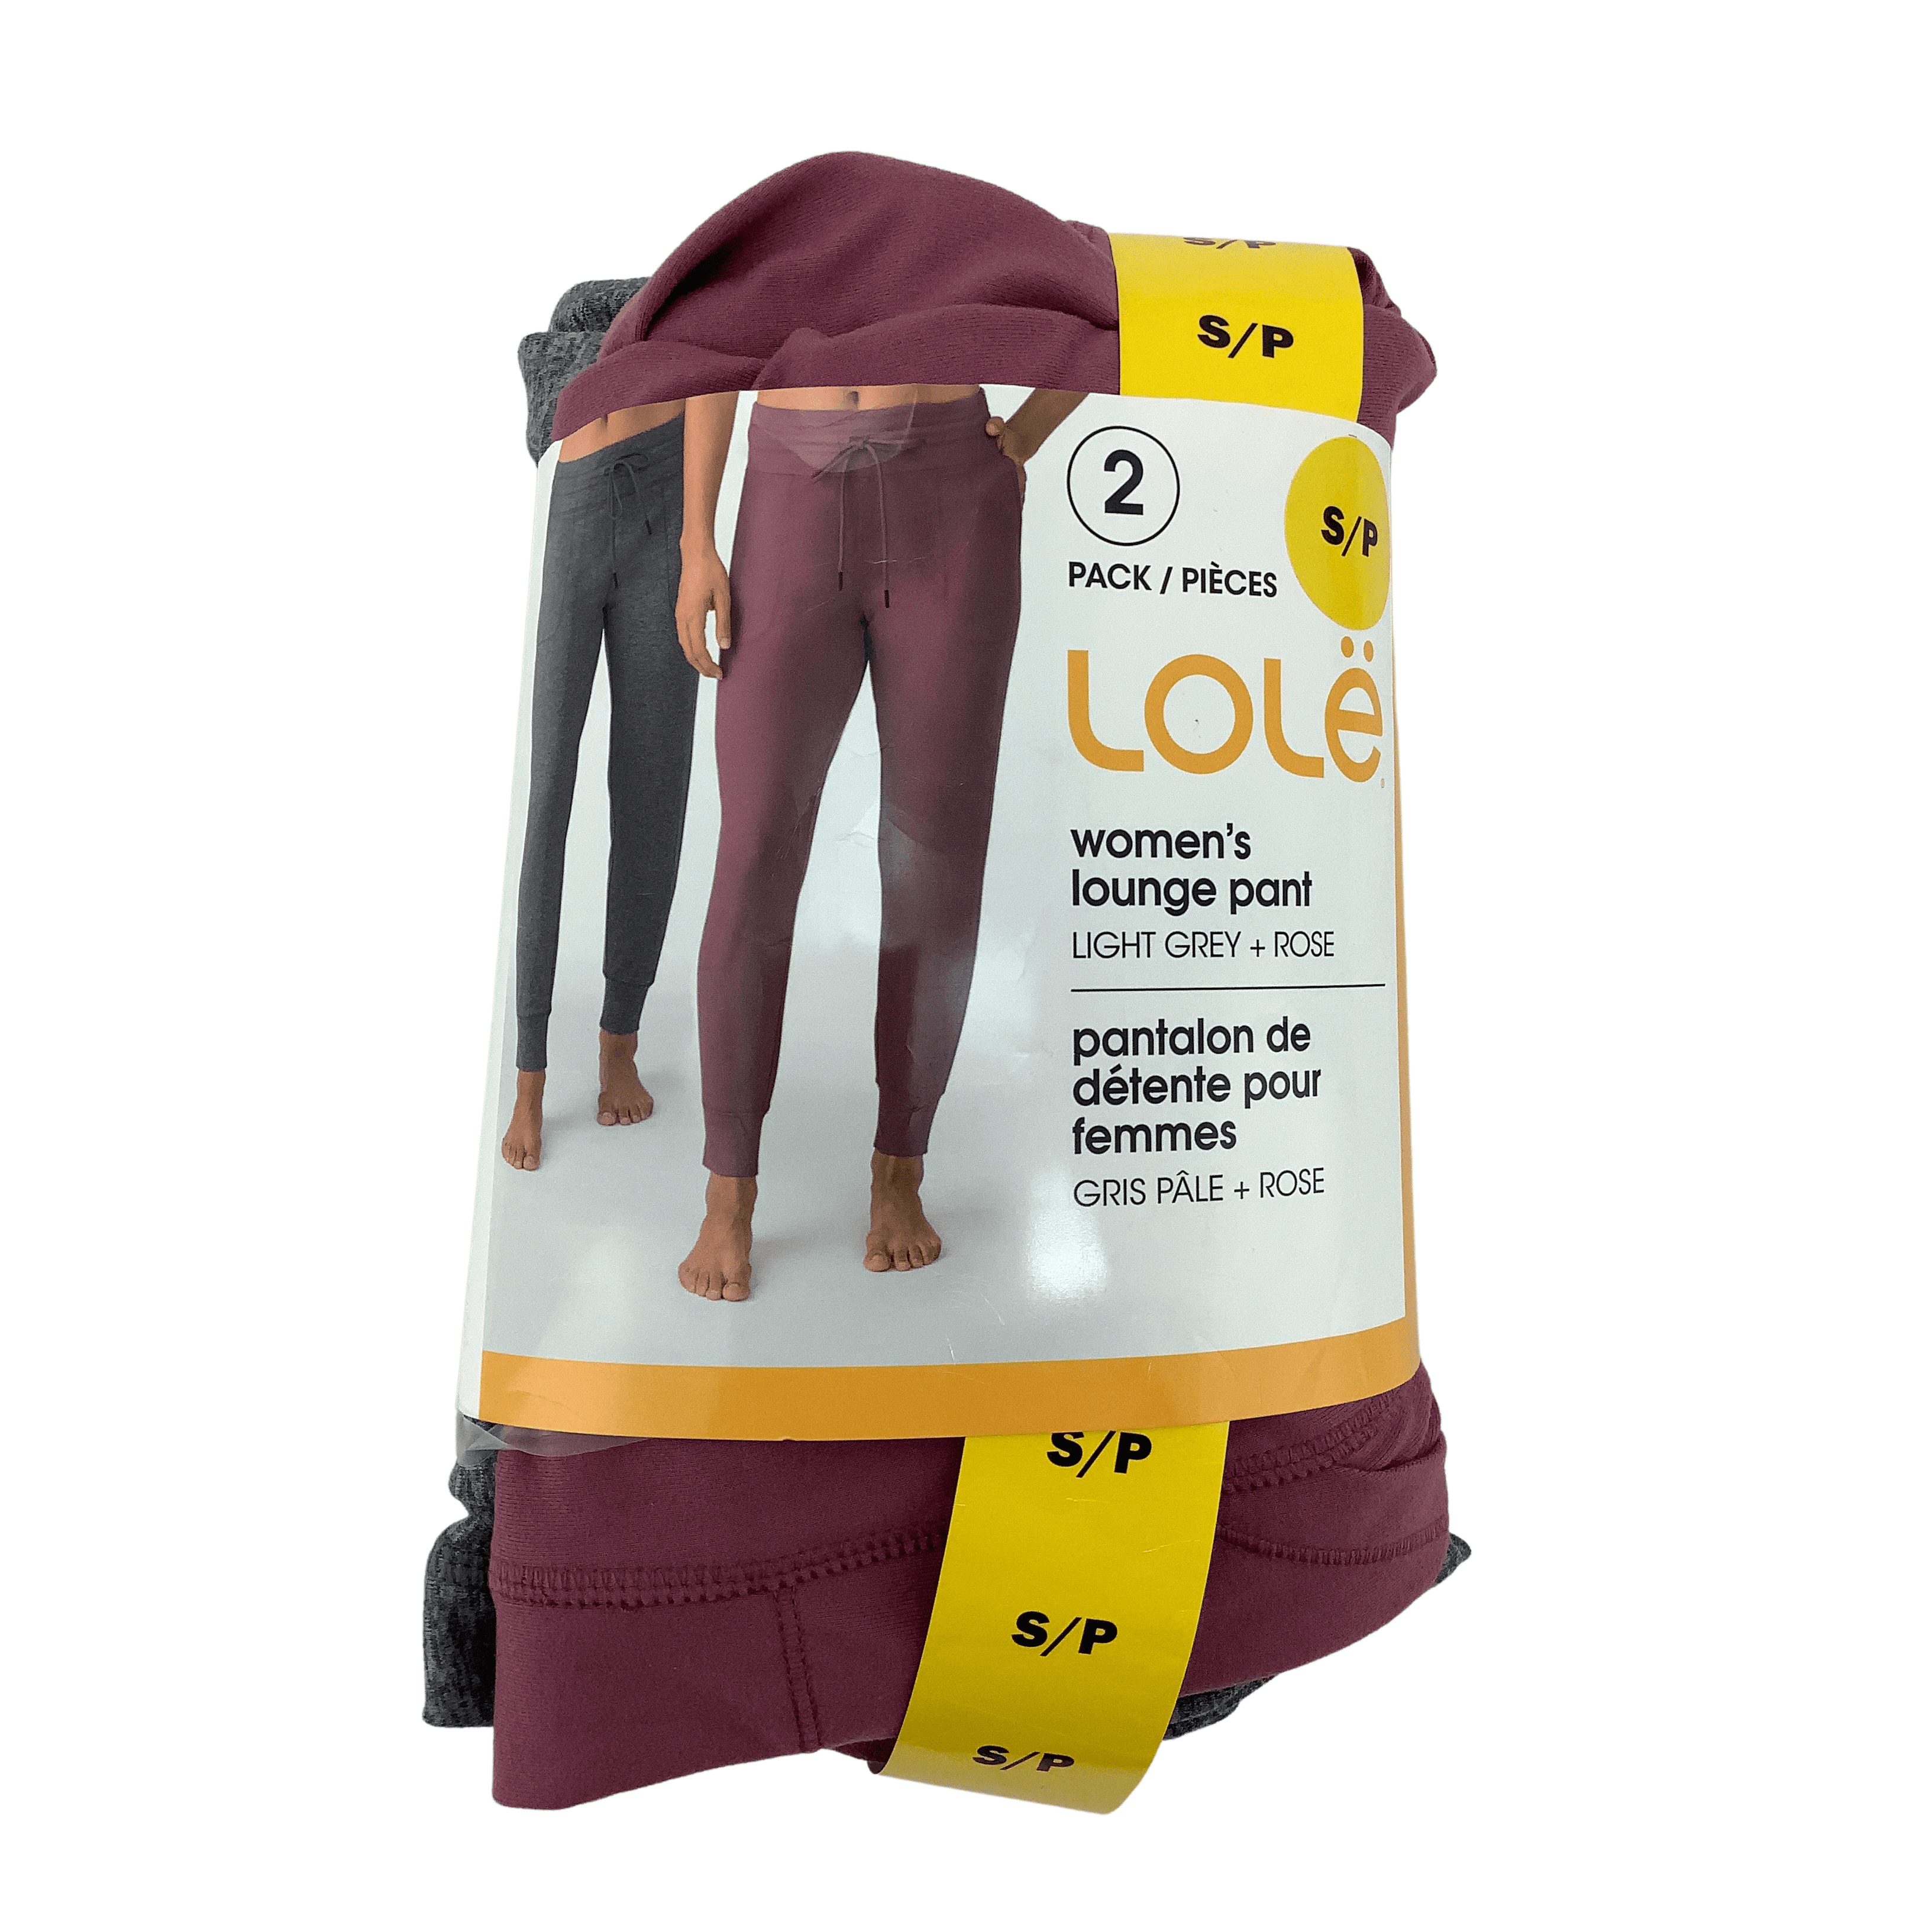 Lolë Women's Lounge Pants / 2 Pack / Grey and Rose / Various Sizes